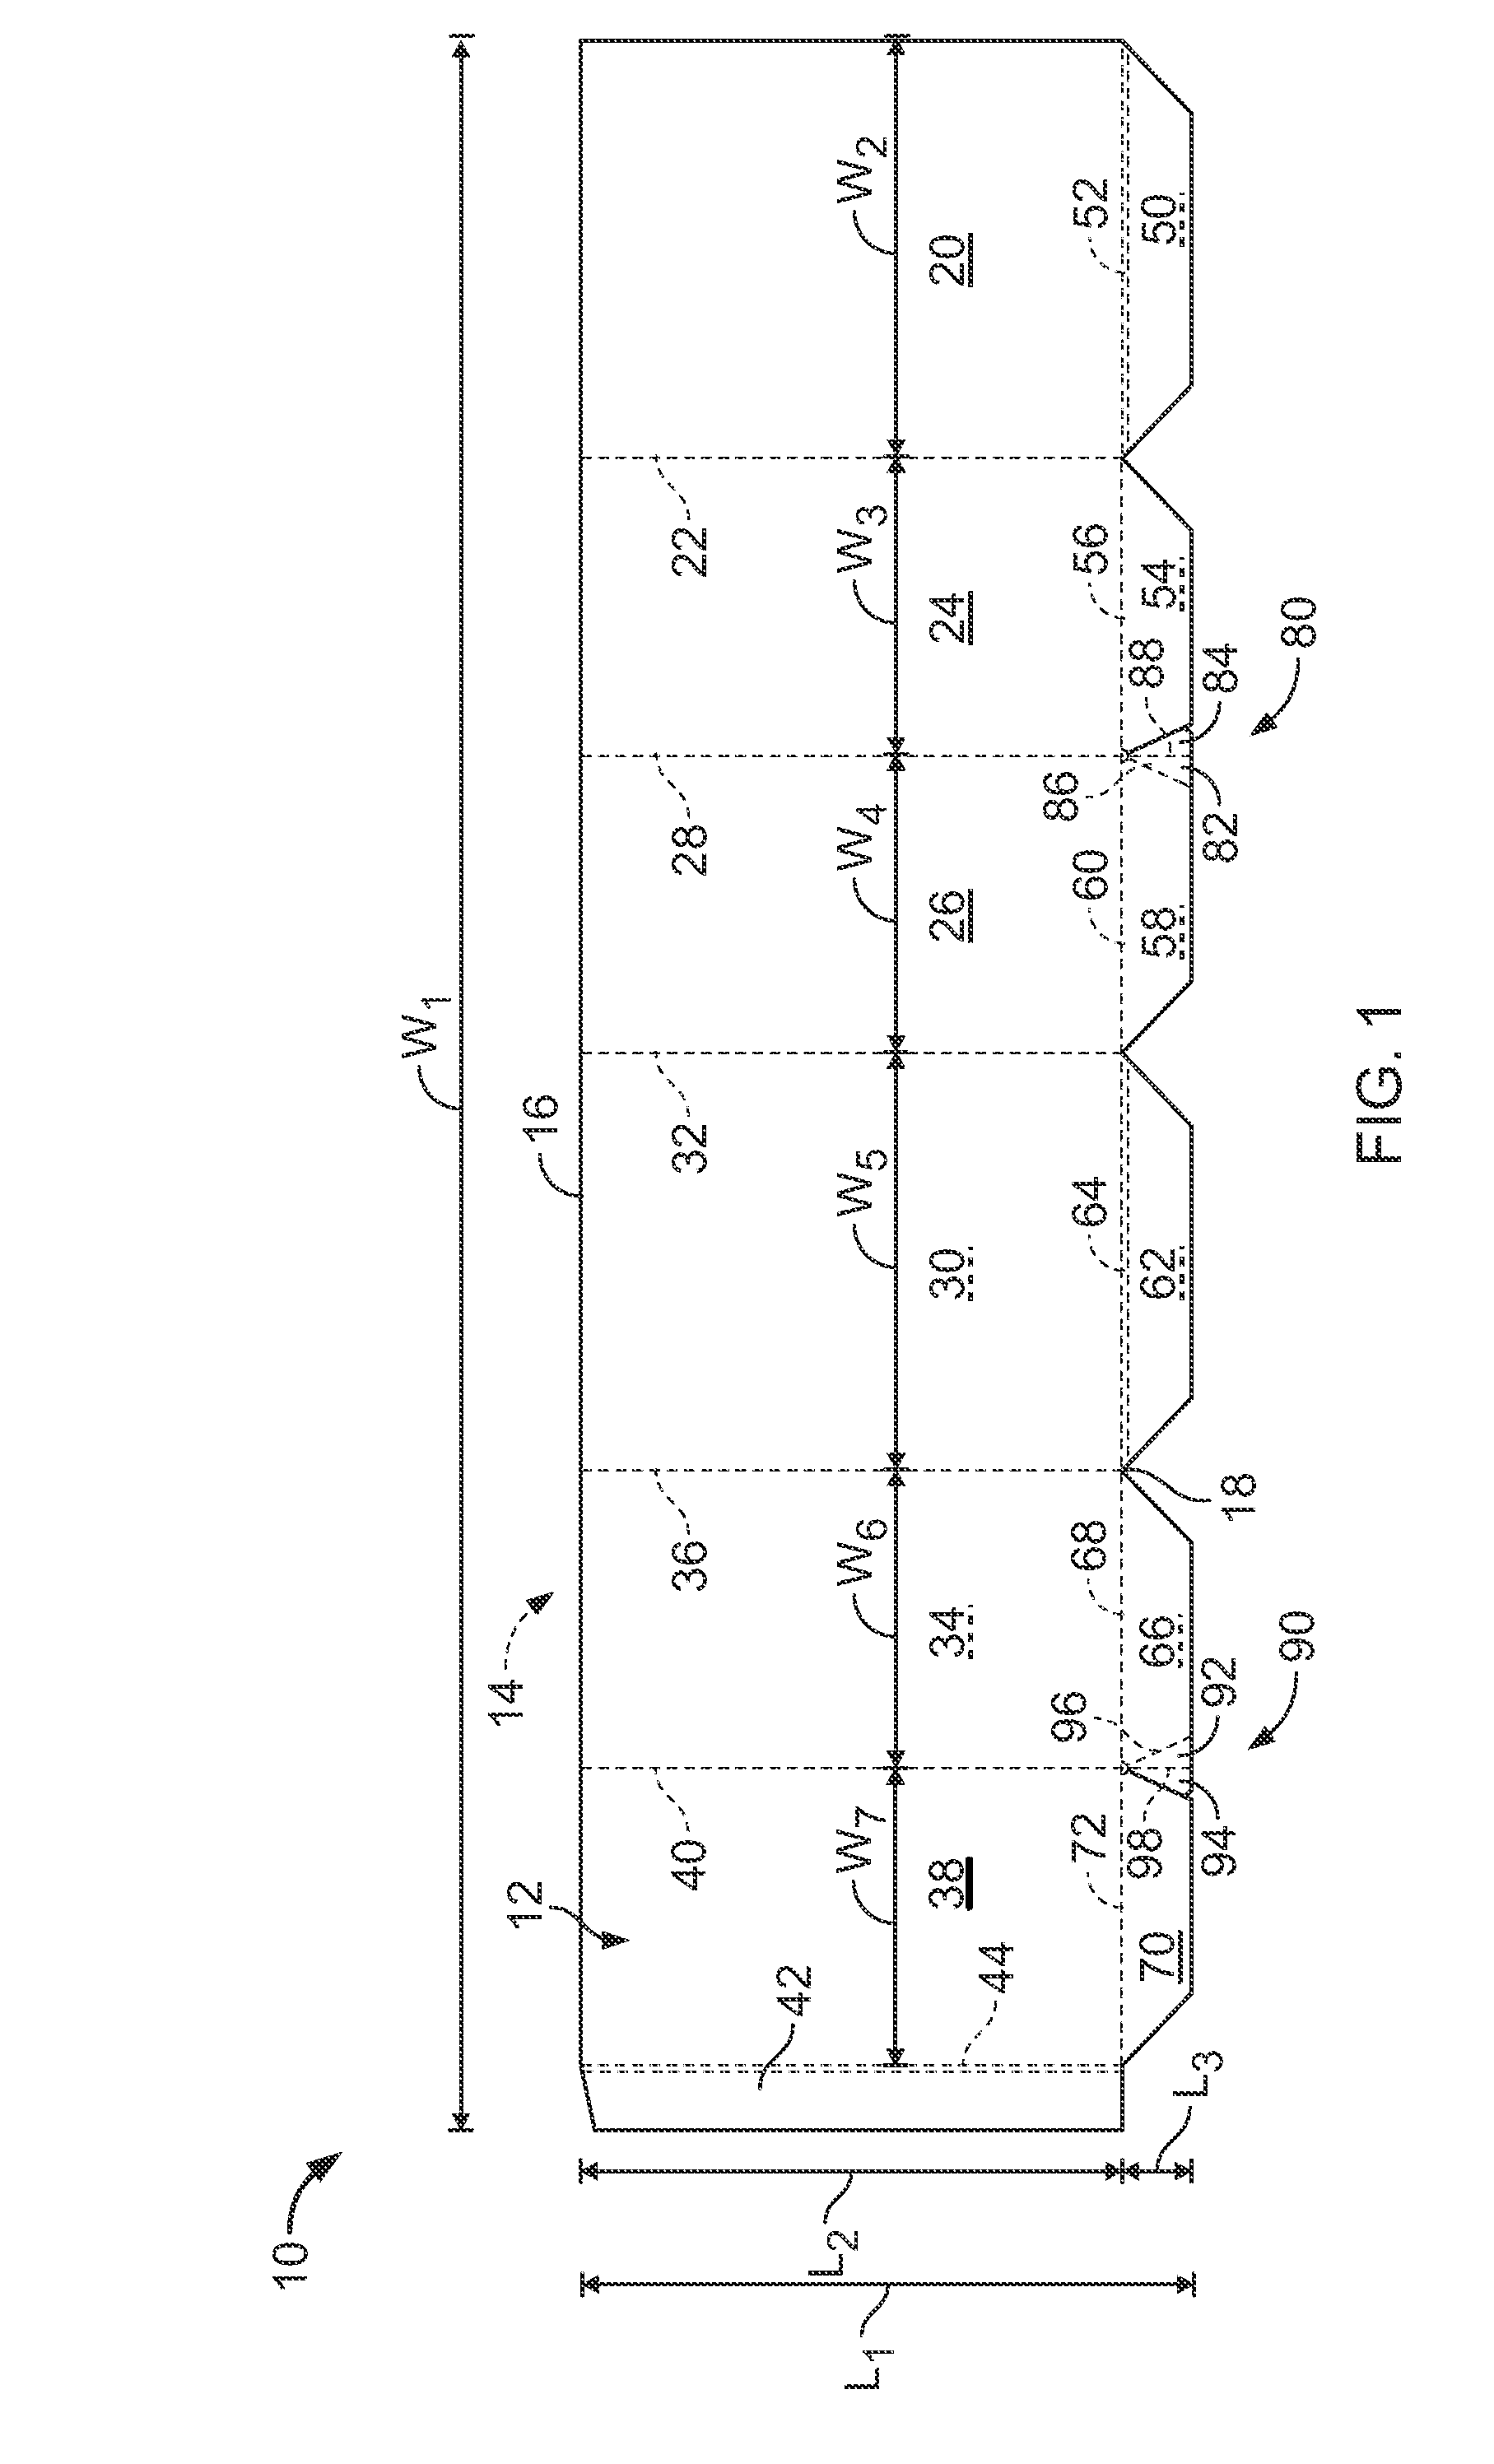 Method and machine for constructing a collapsible bulk bin